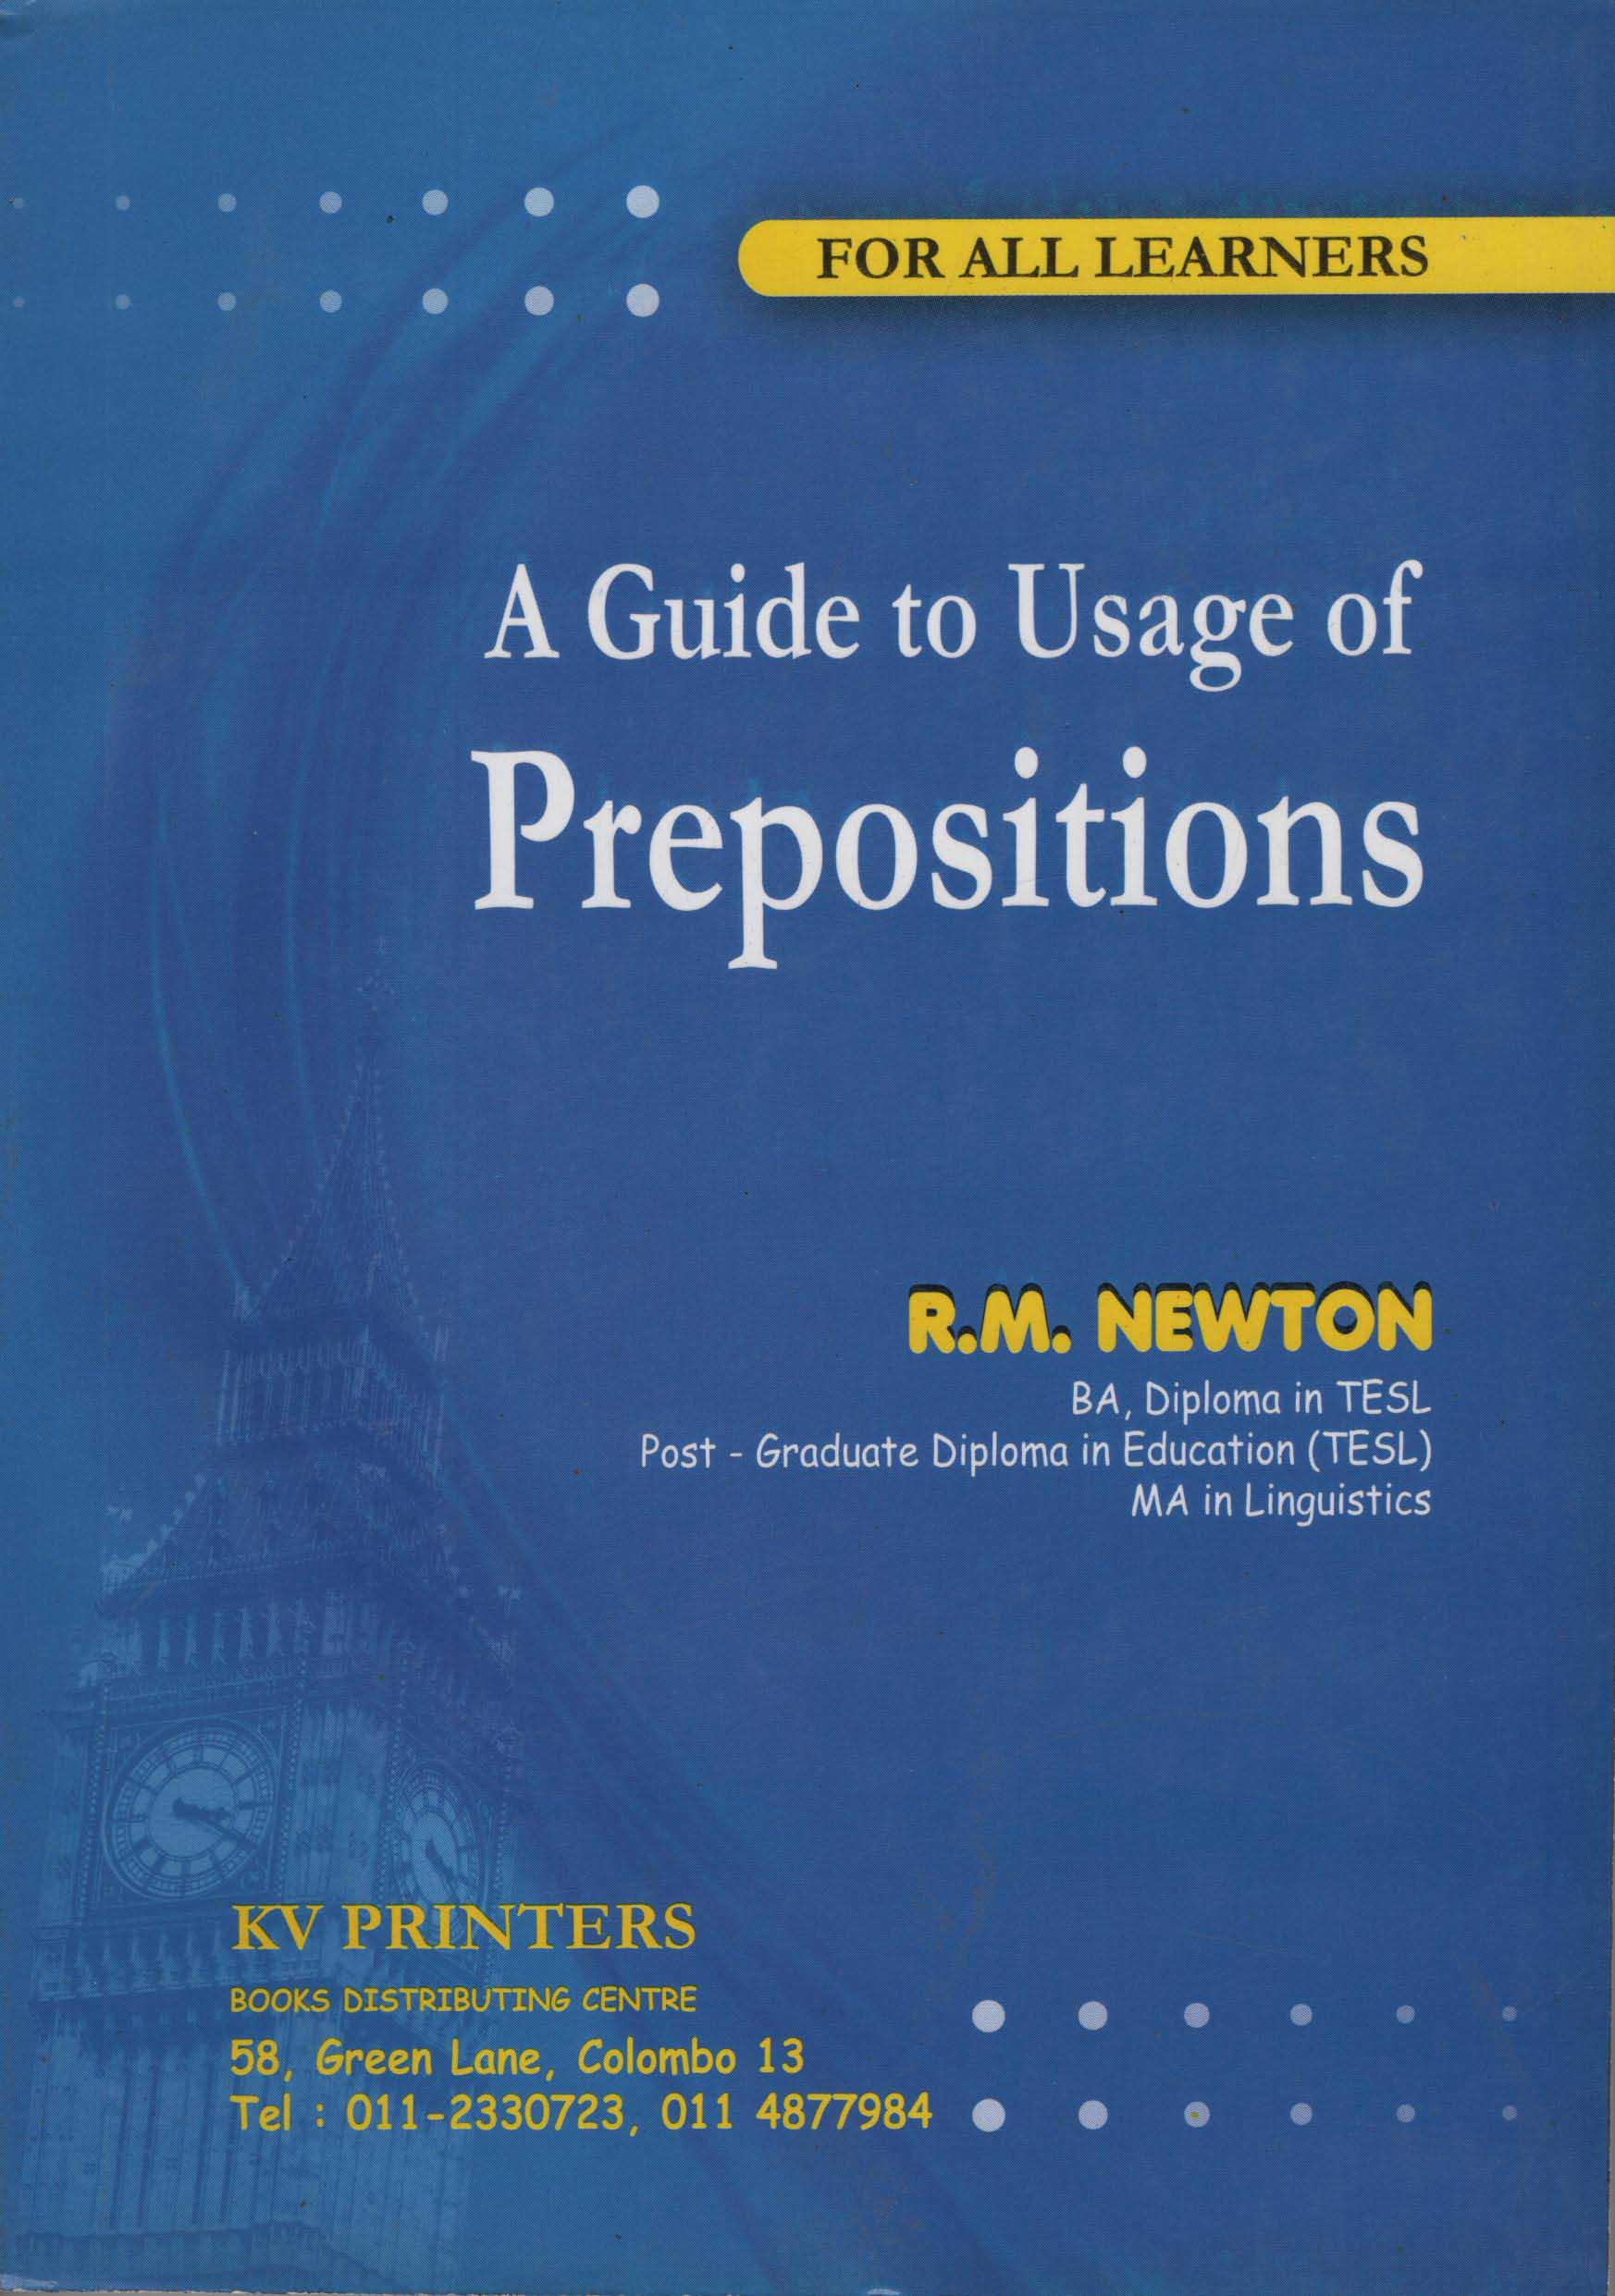 A Guide to Usage of Prepositions for All Learners